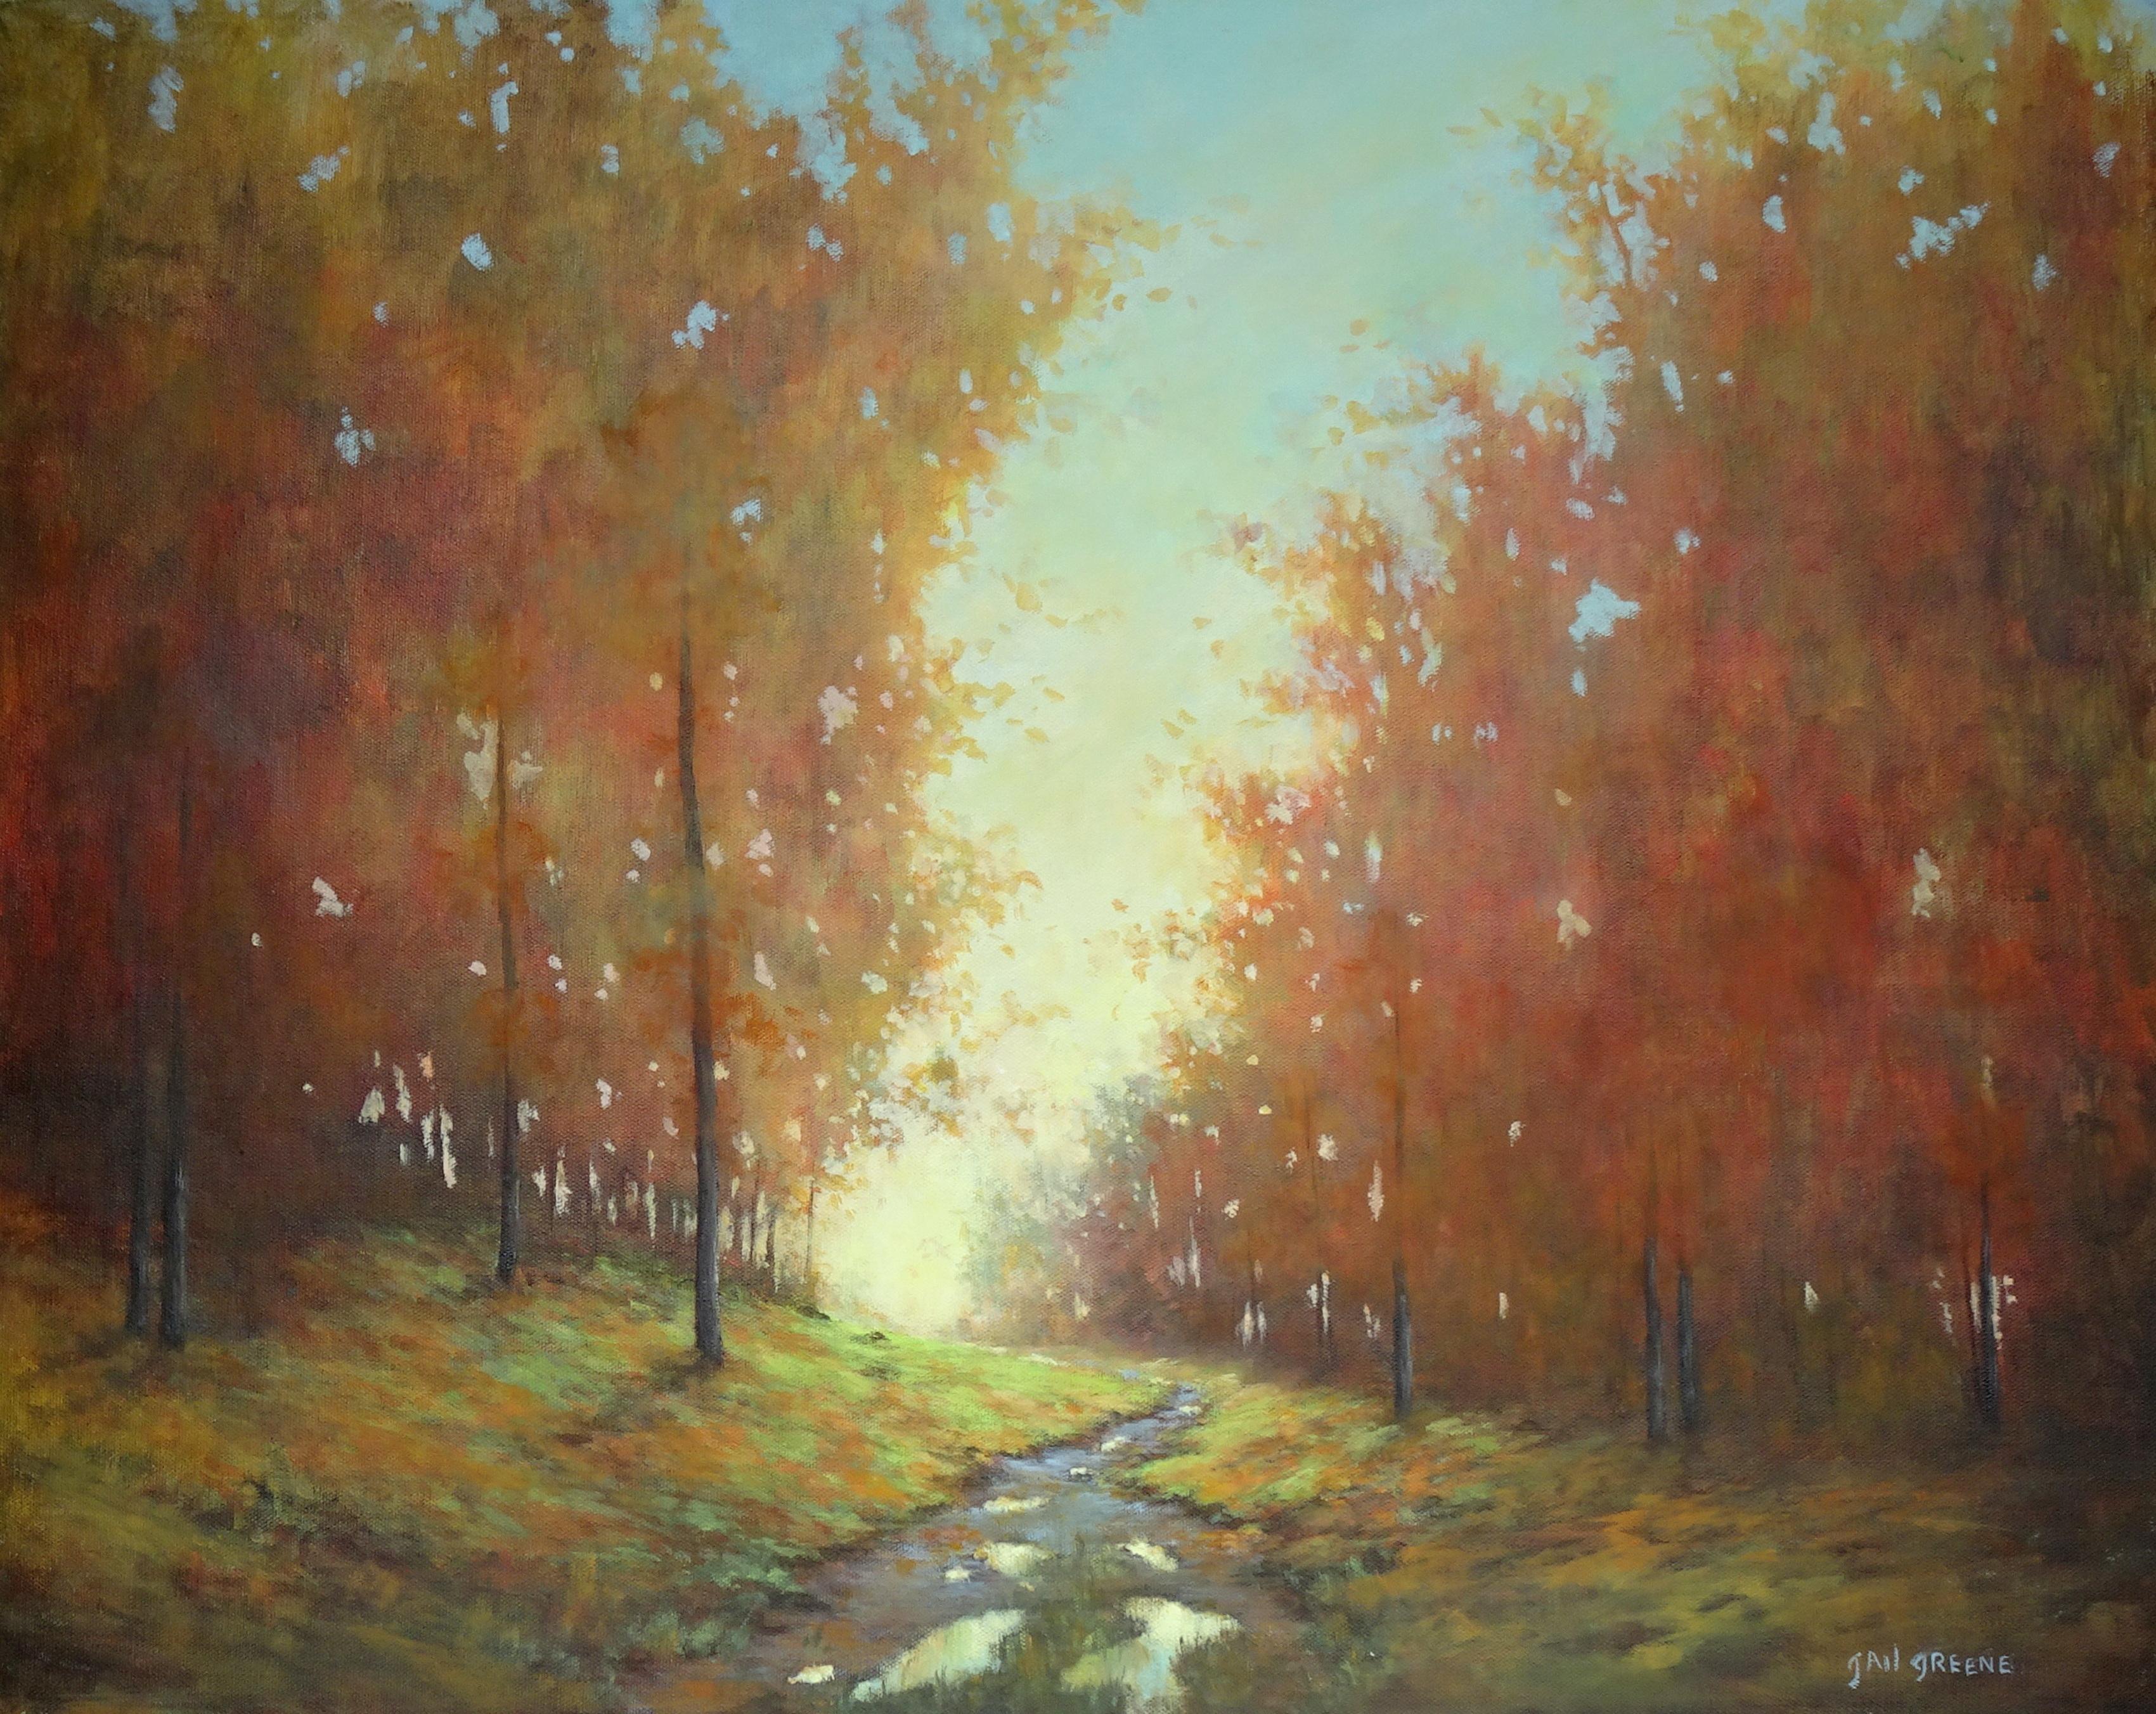 Gail Greene Landscape Painting - Cinnamon and Cider, Oil Painting